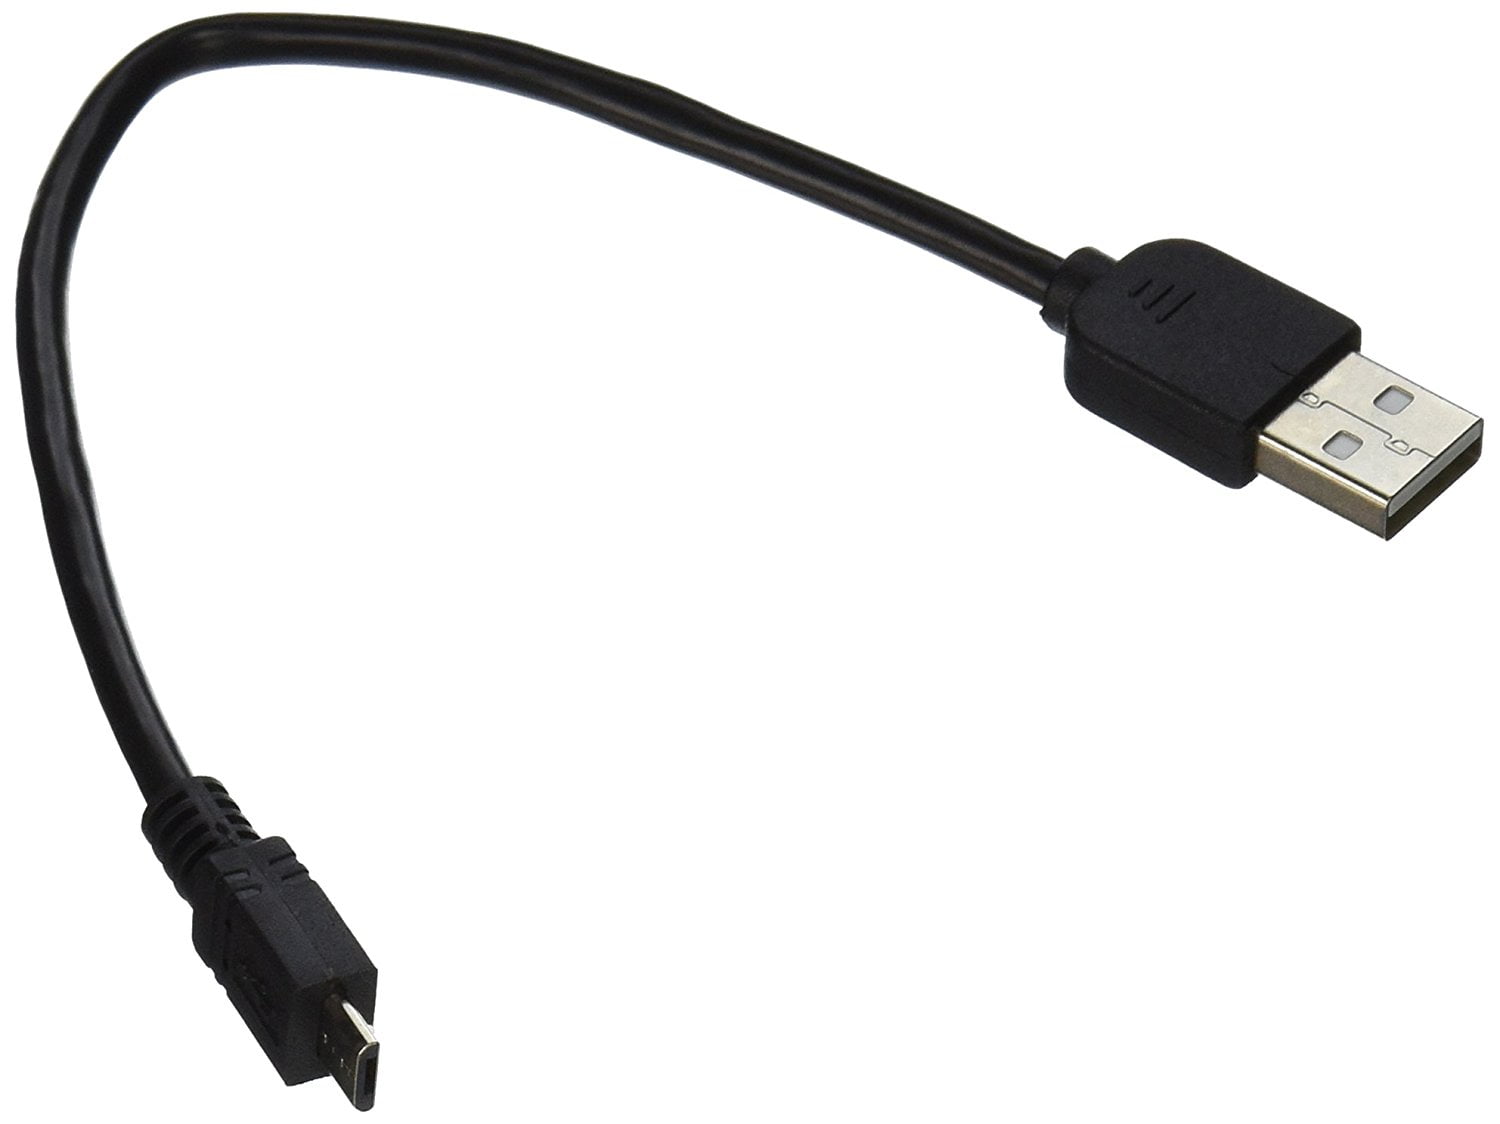 Ziotek ZT1311550 7.5-Inch USB 2.0 Type A Male to Type B Mini 5-Pin USB Cable 